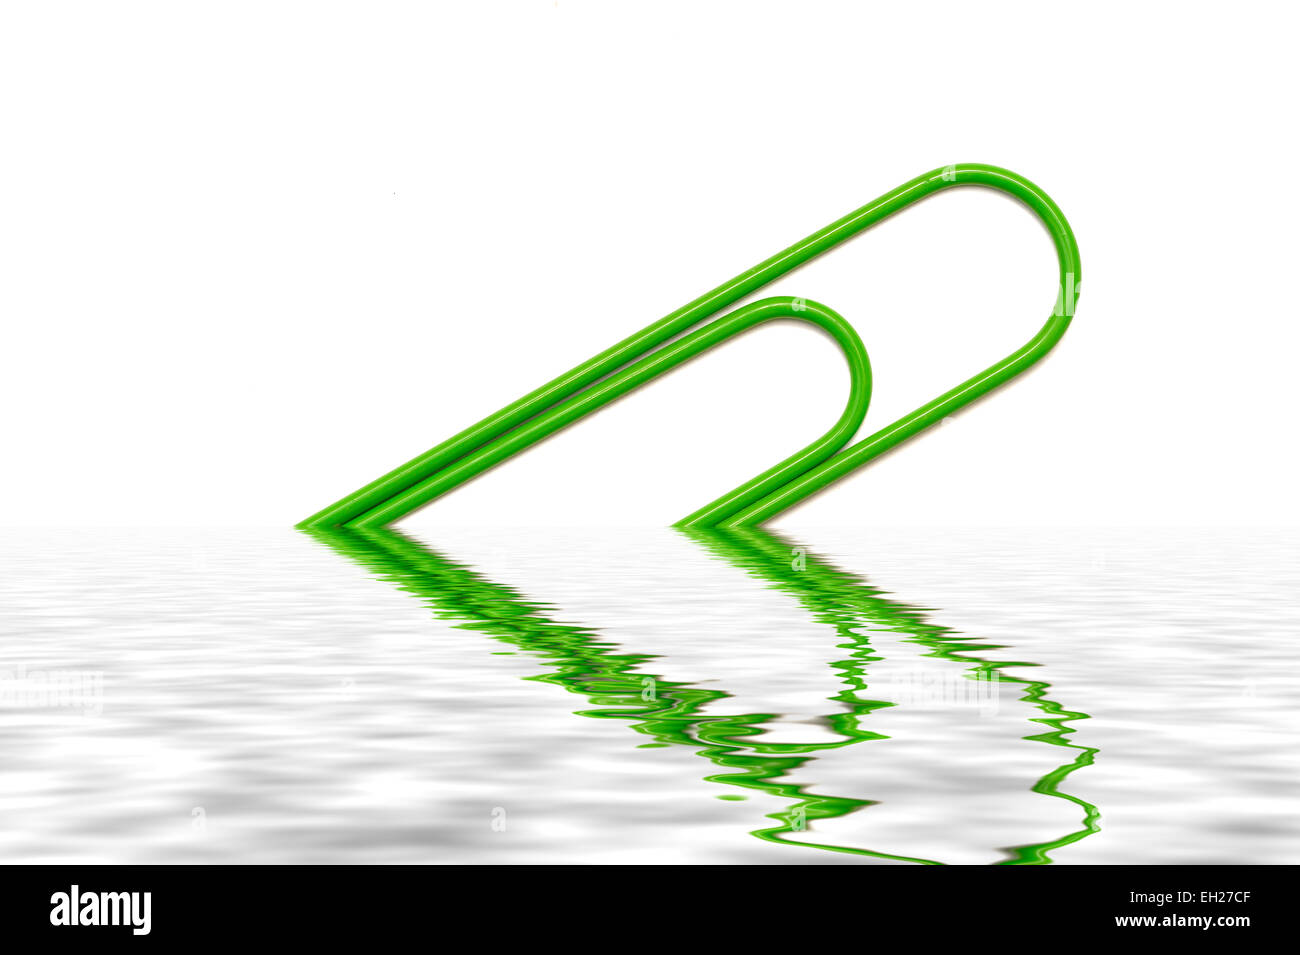 A Giant green paper clip digitally mirrored into a pool of water Stock Photo